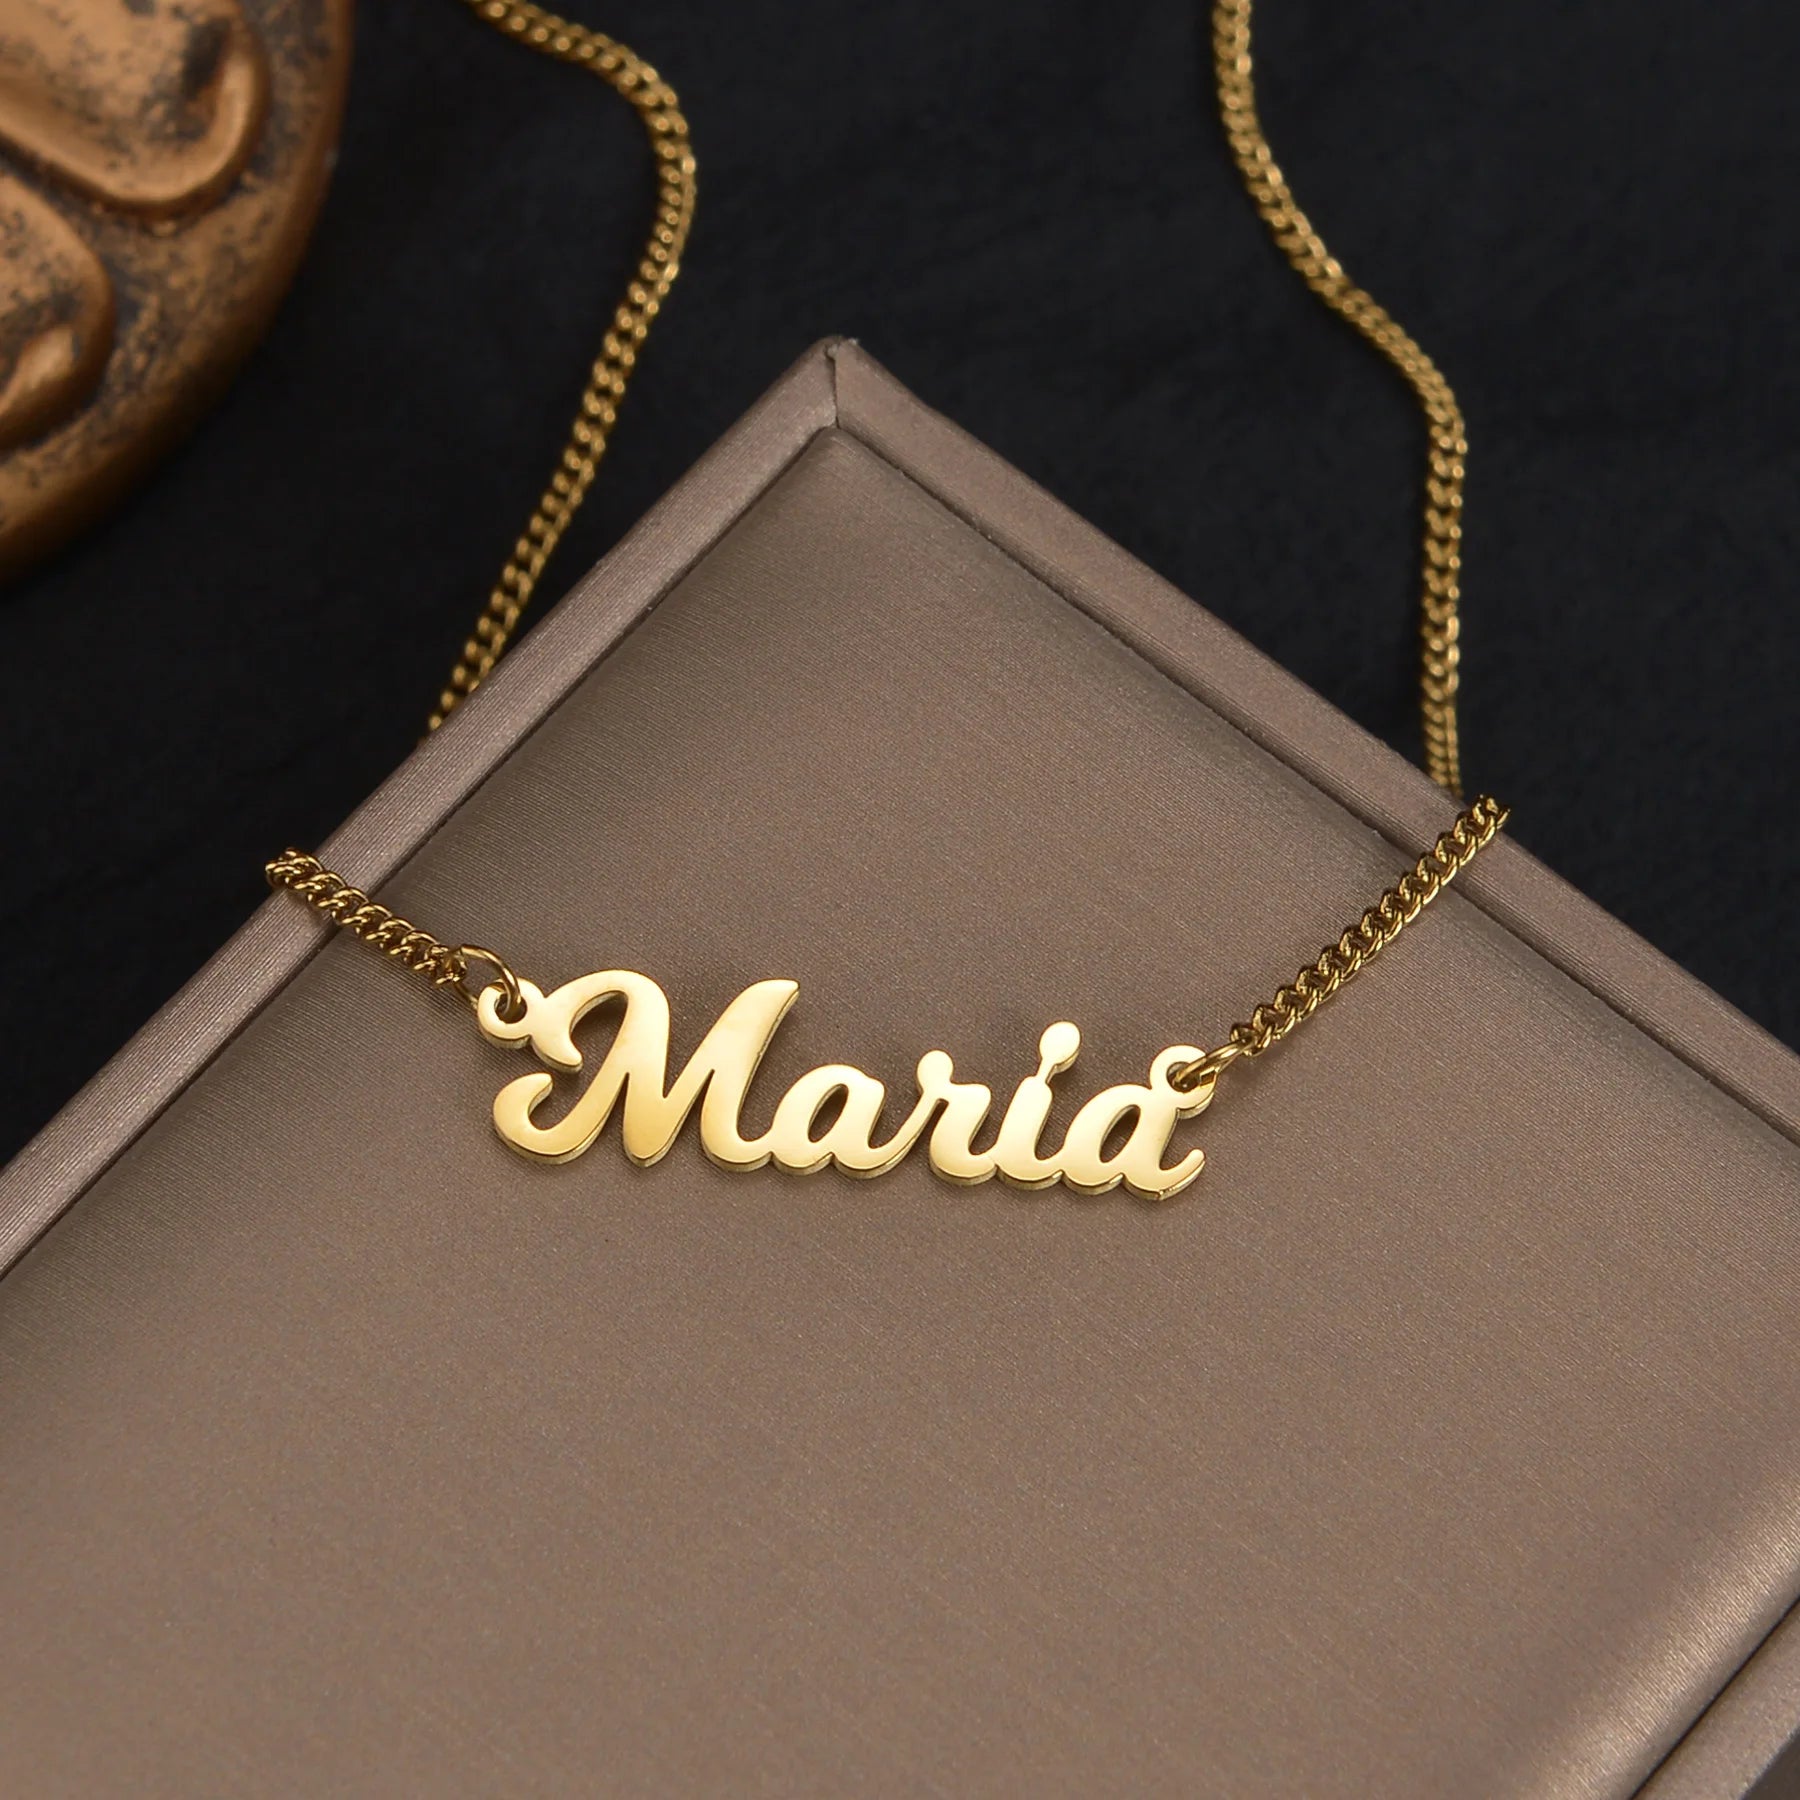 Stunning Stainless Steel Personalized Name Necklaces with 18K Gold Plating